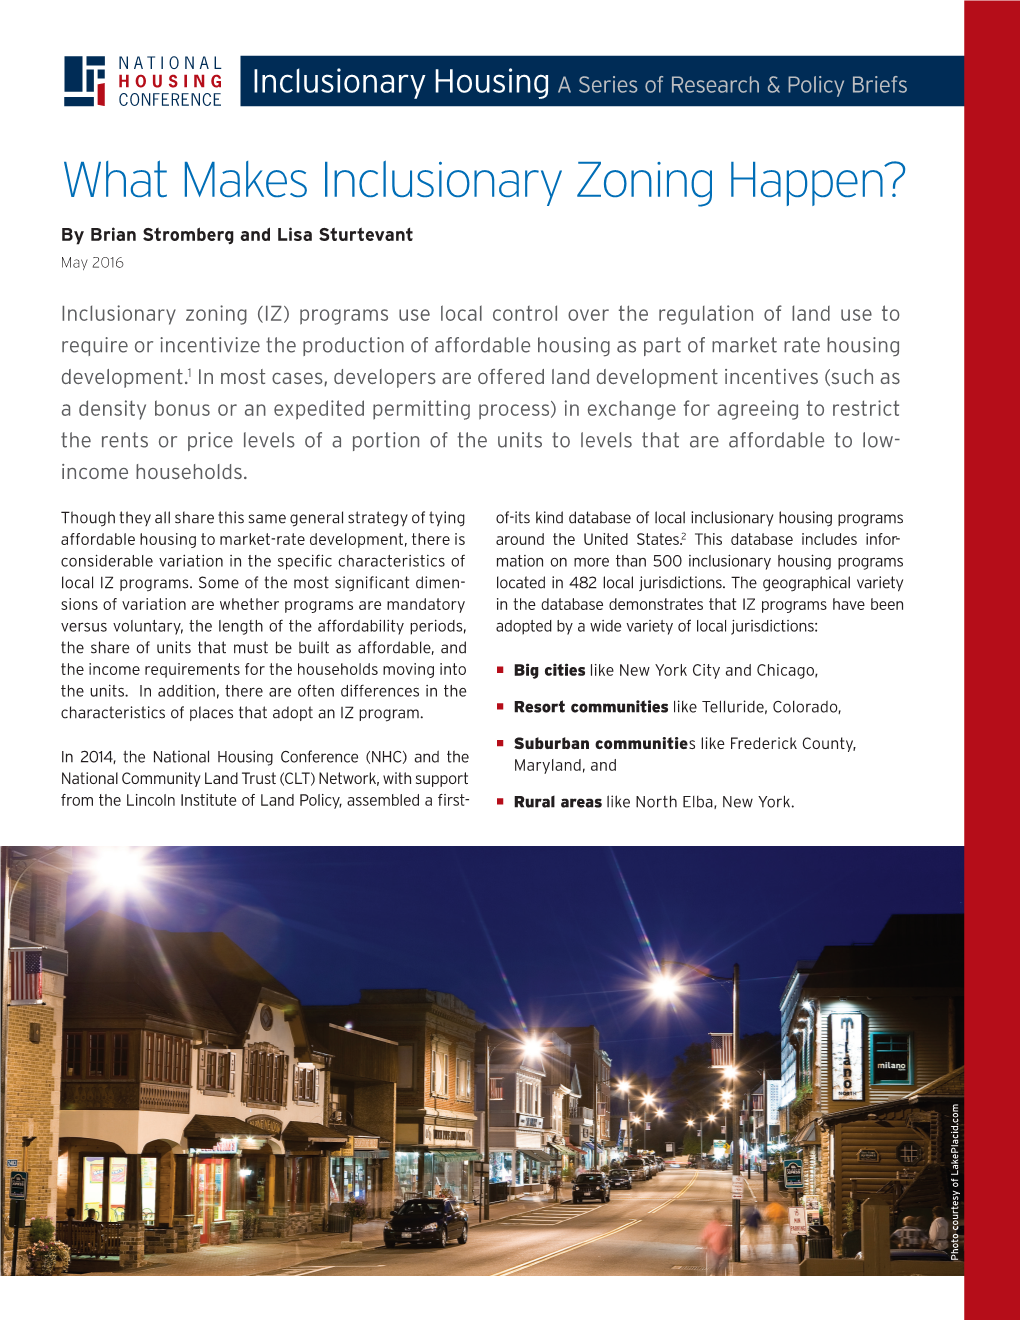 Inclusionary Zoning Happen?